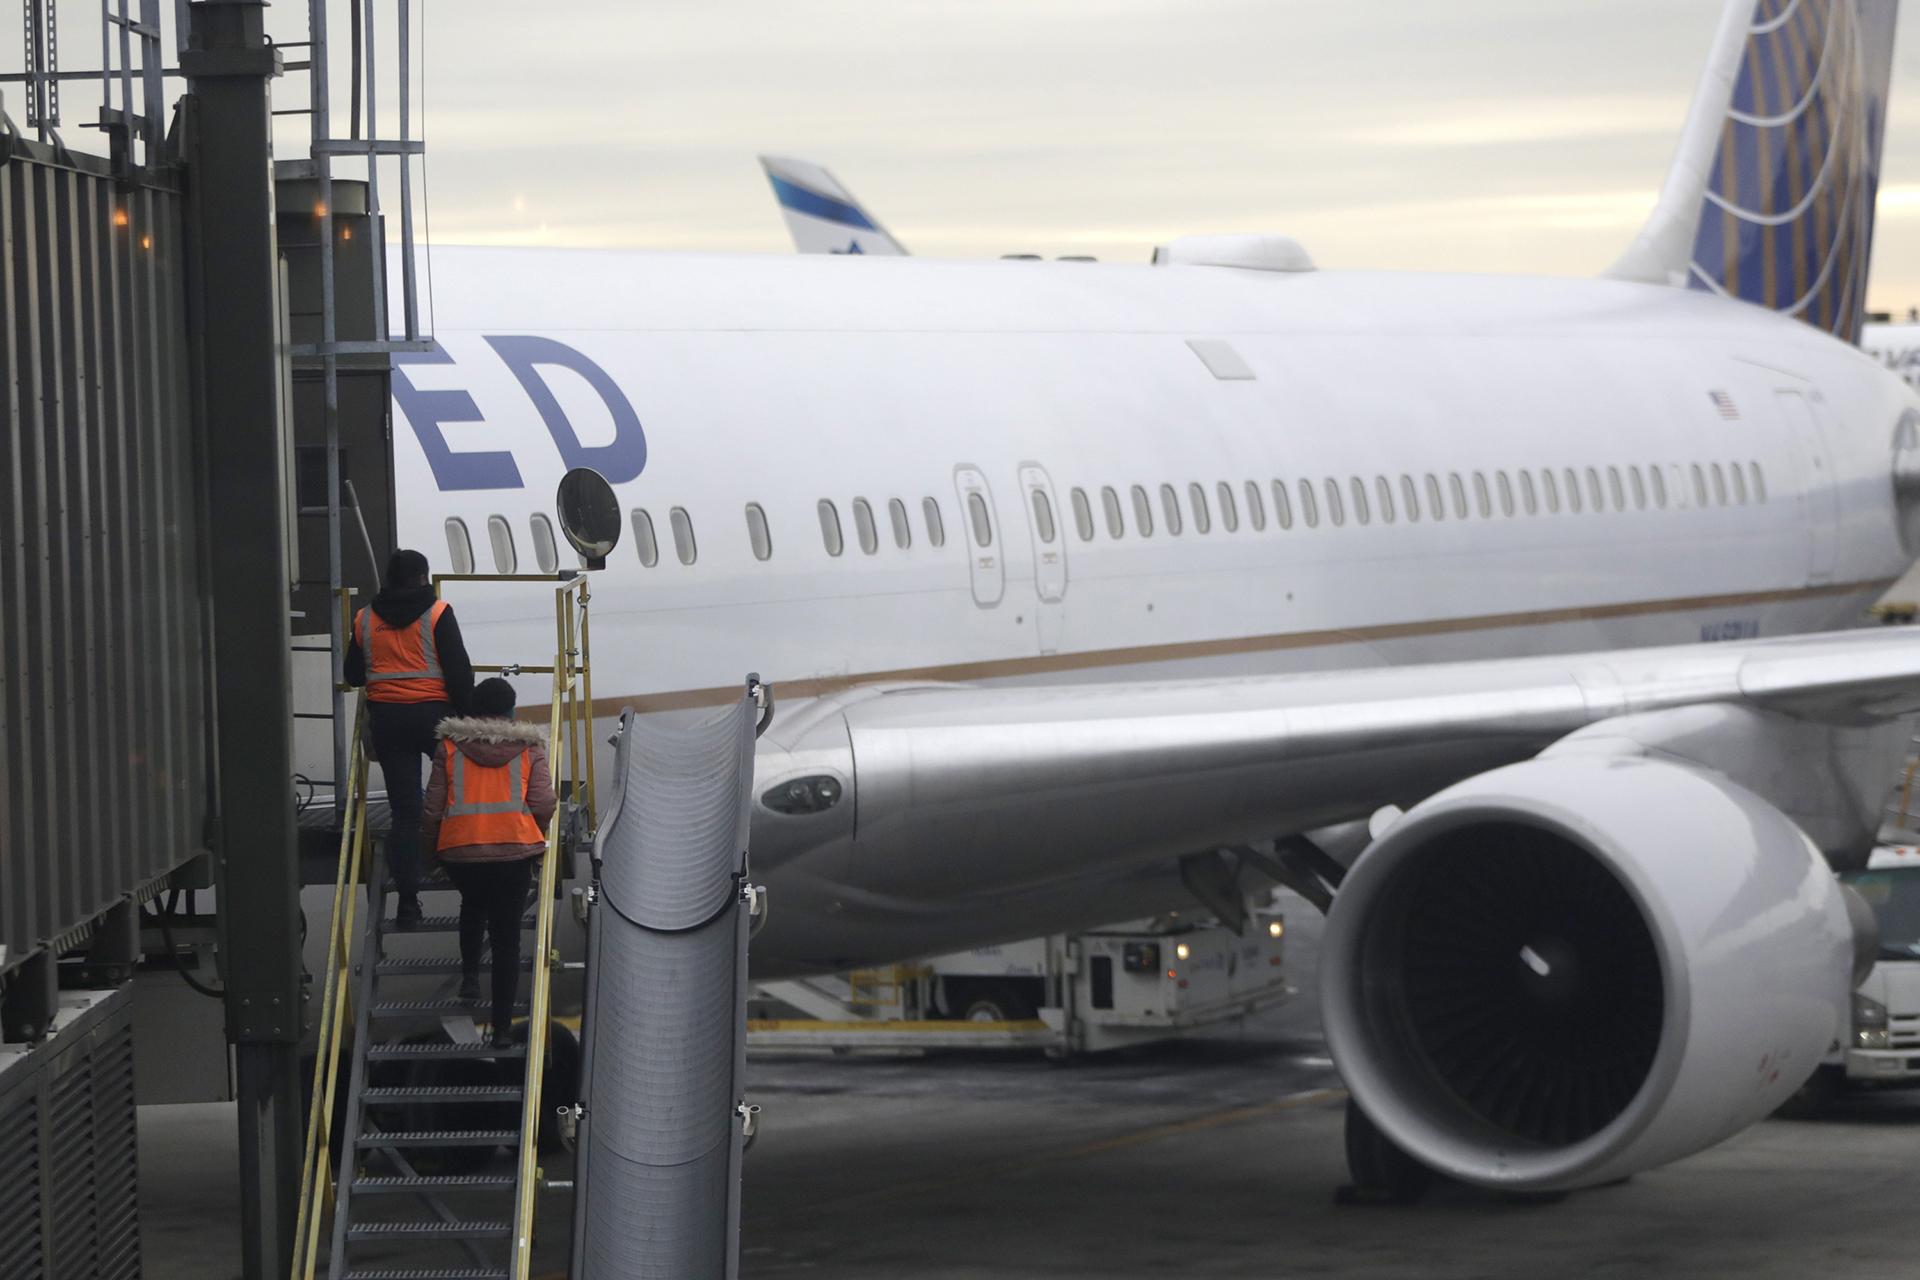 In this Jan. 23, 2019, photo employees walk up a ramp toward a ramp where a United Airlines jet is parked at a gate Newark Liberty International Airport in Newark, New Jersey. (AP Photo / Julio Cortez)